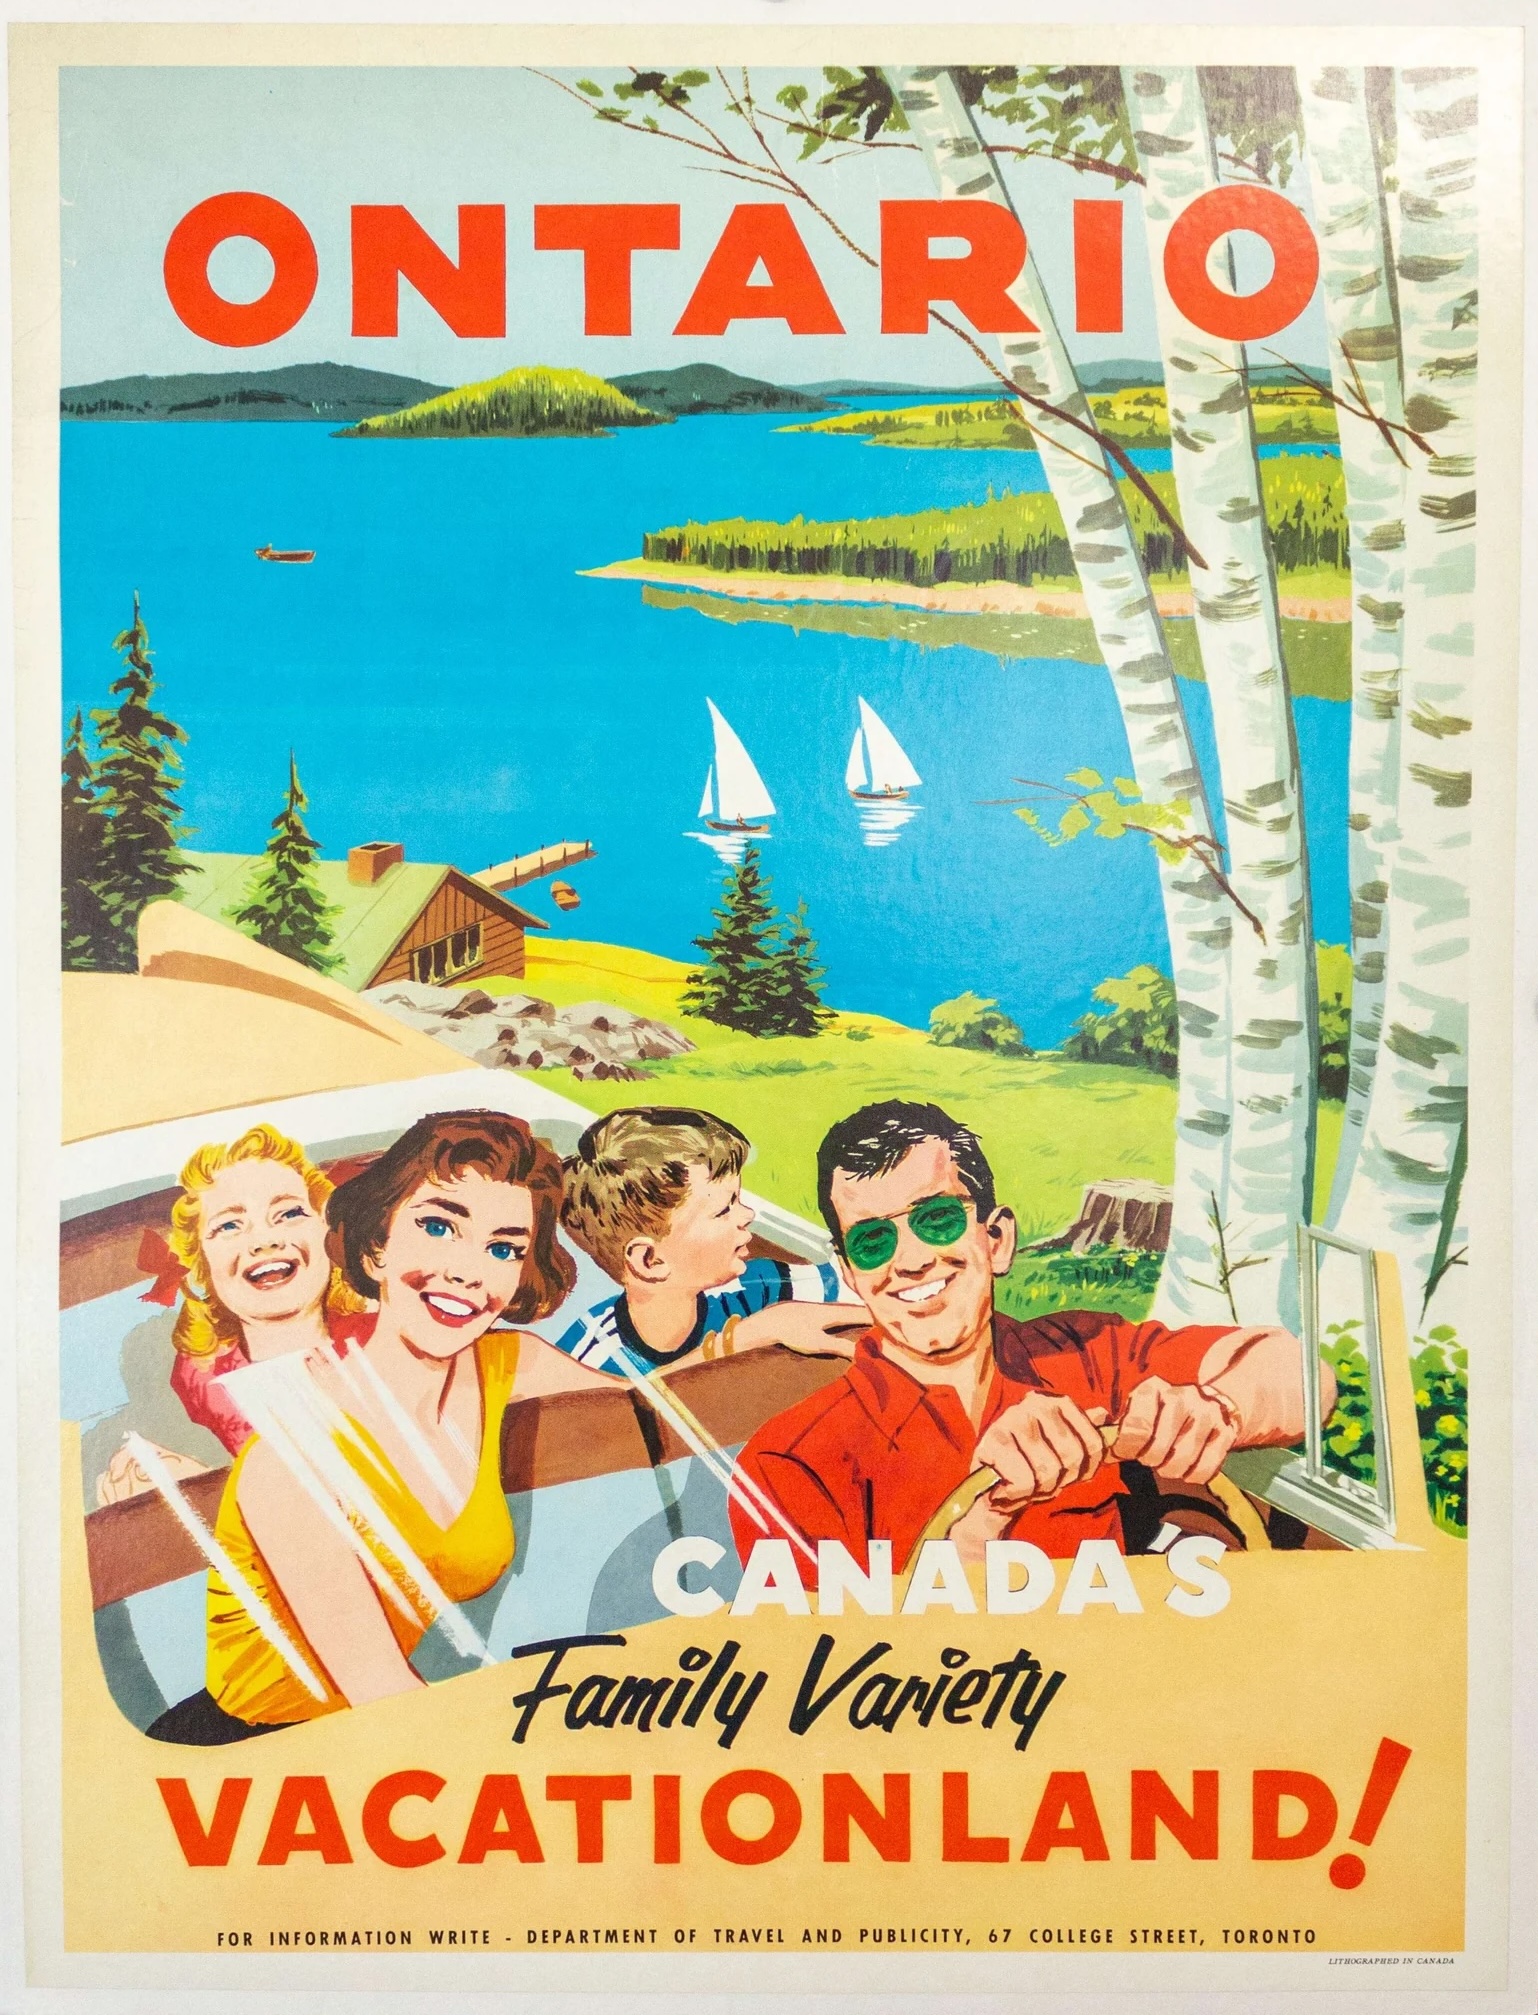 A vintage 1950's illustrated tourism ad featuring a smiling family in a convertible driving next to a large blue lake and birch trees. The shores of the lake are forested, and there is a cabin on the edge, and sailboats on the water. The text reads "Ontario, Canada's family variety vacationland!"